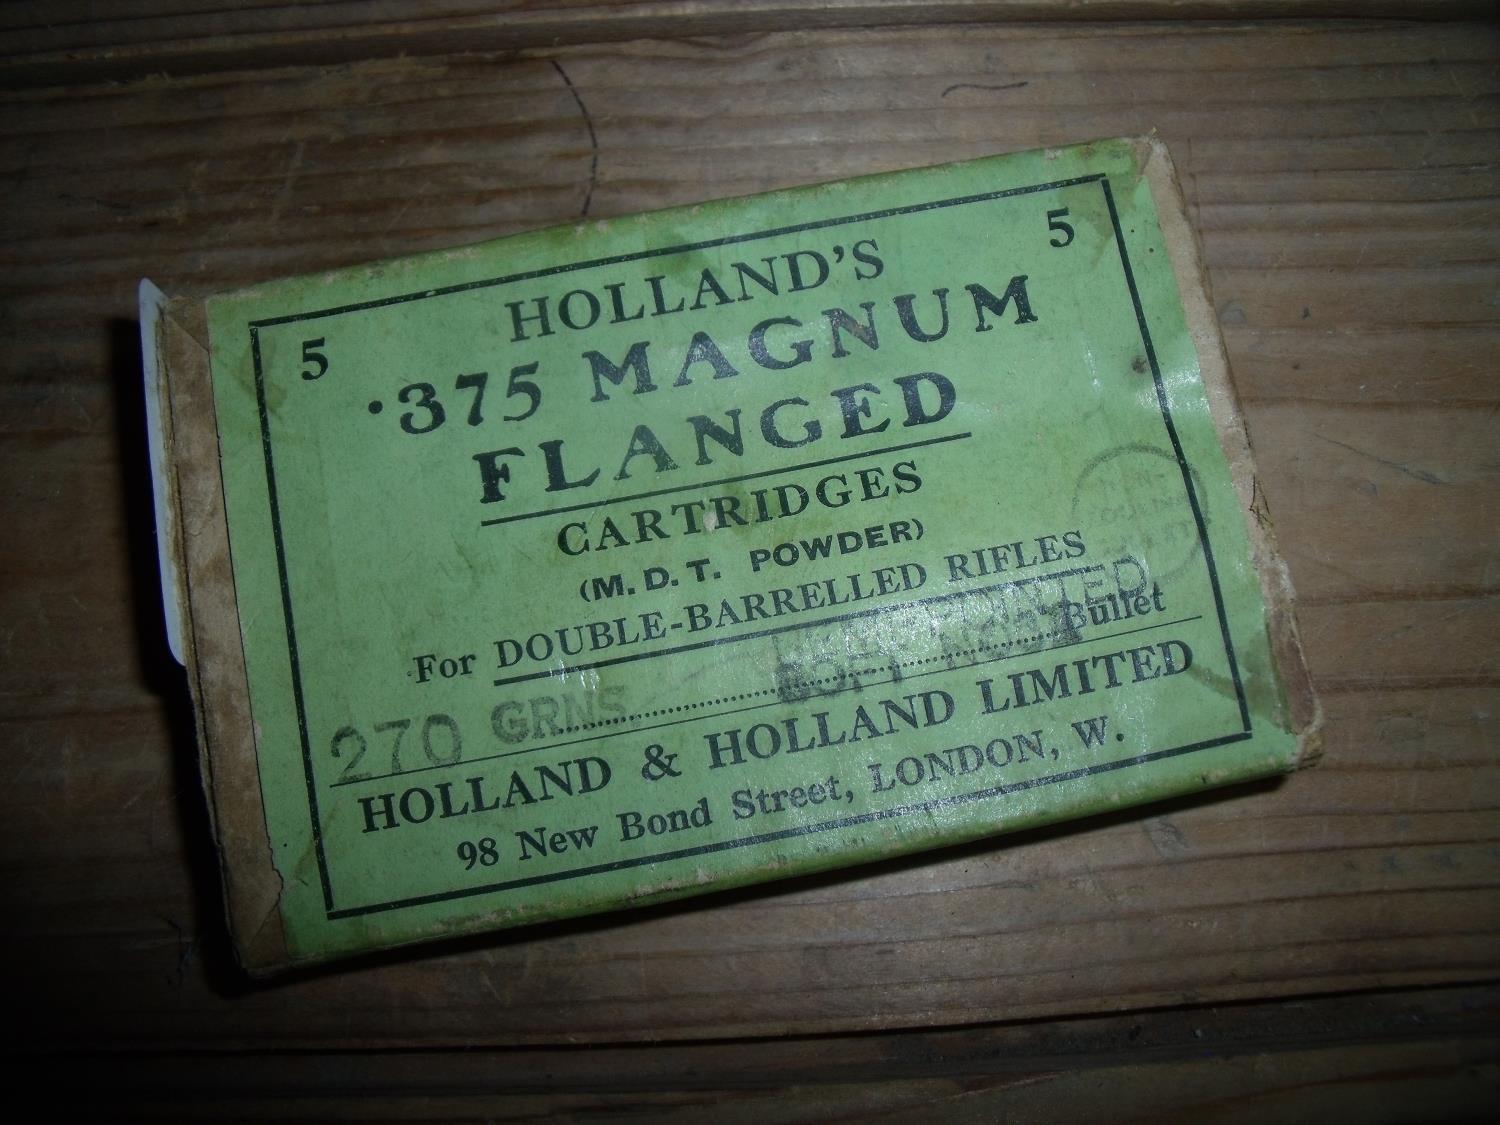 Original cased and unsealed box of 5 Hollands .375 Magnum flanged cartridges for double barrelled